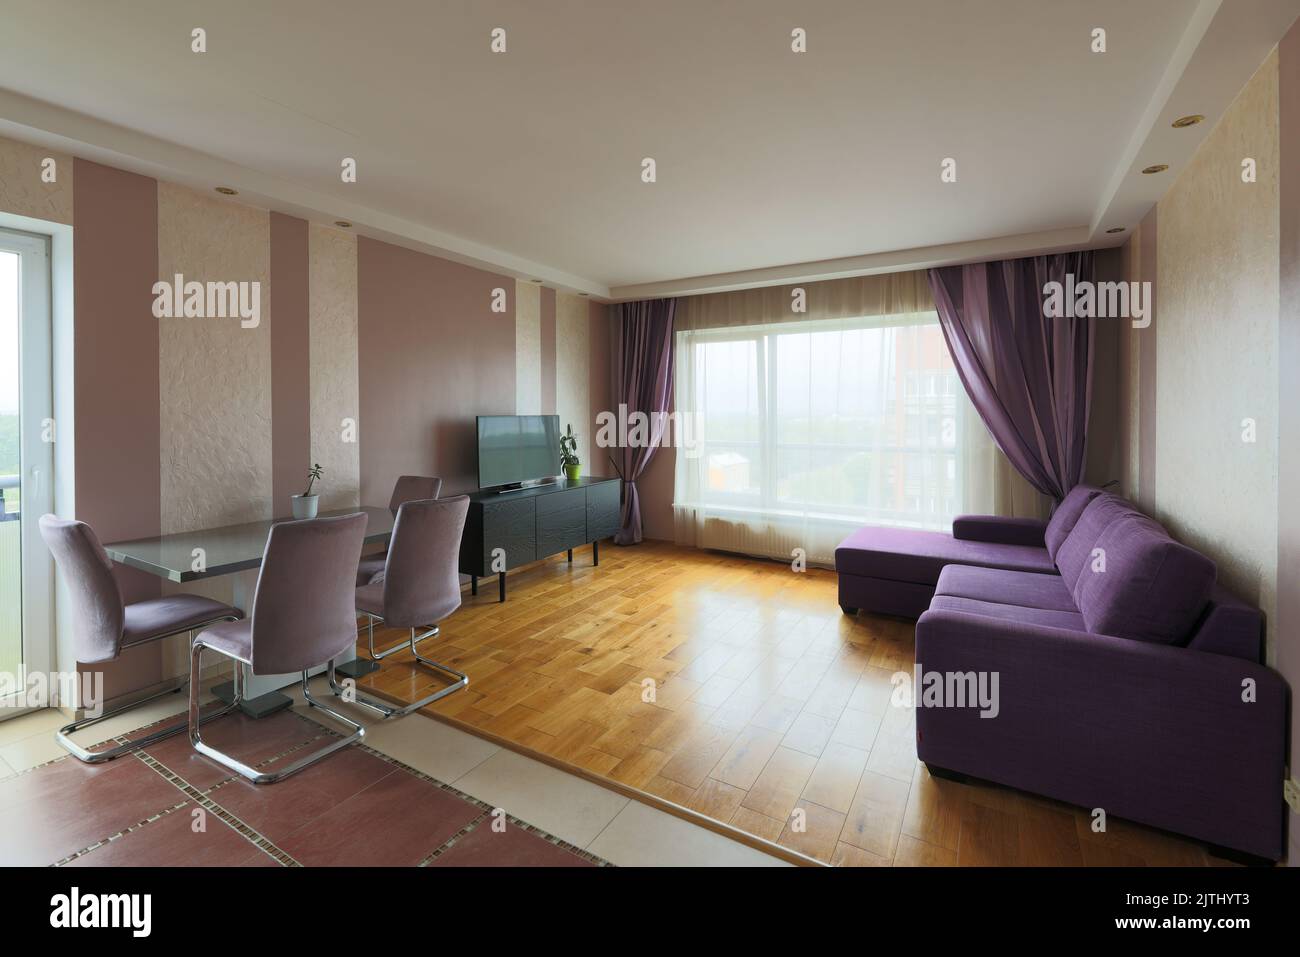 interior view of a purple style design apartment living room Stock Photo